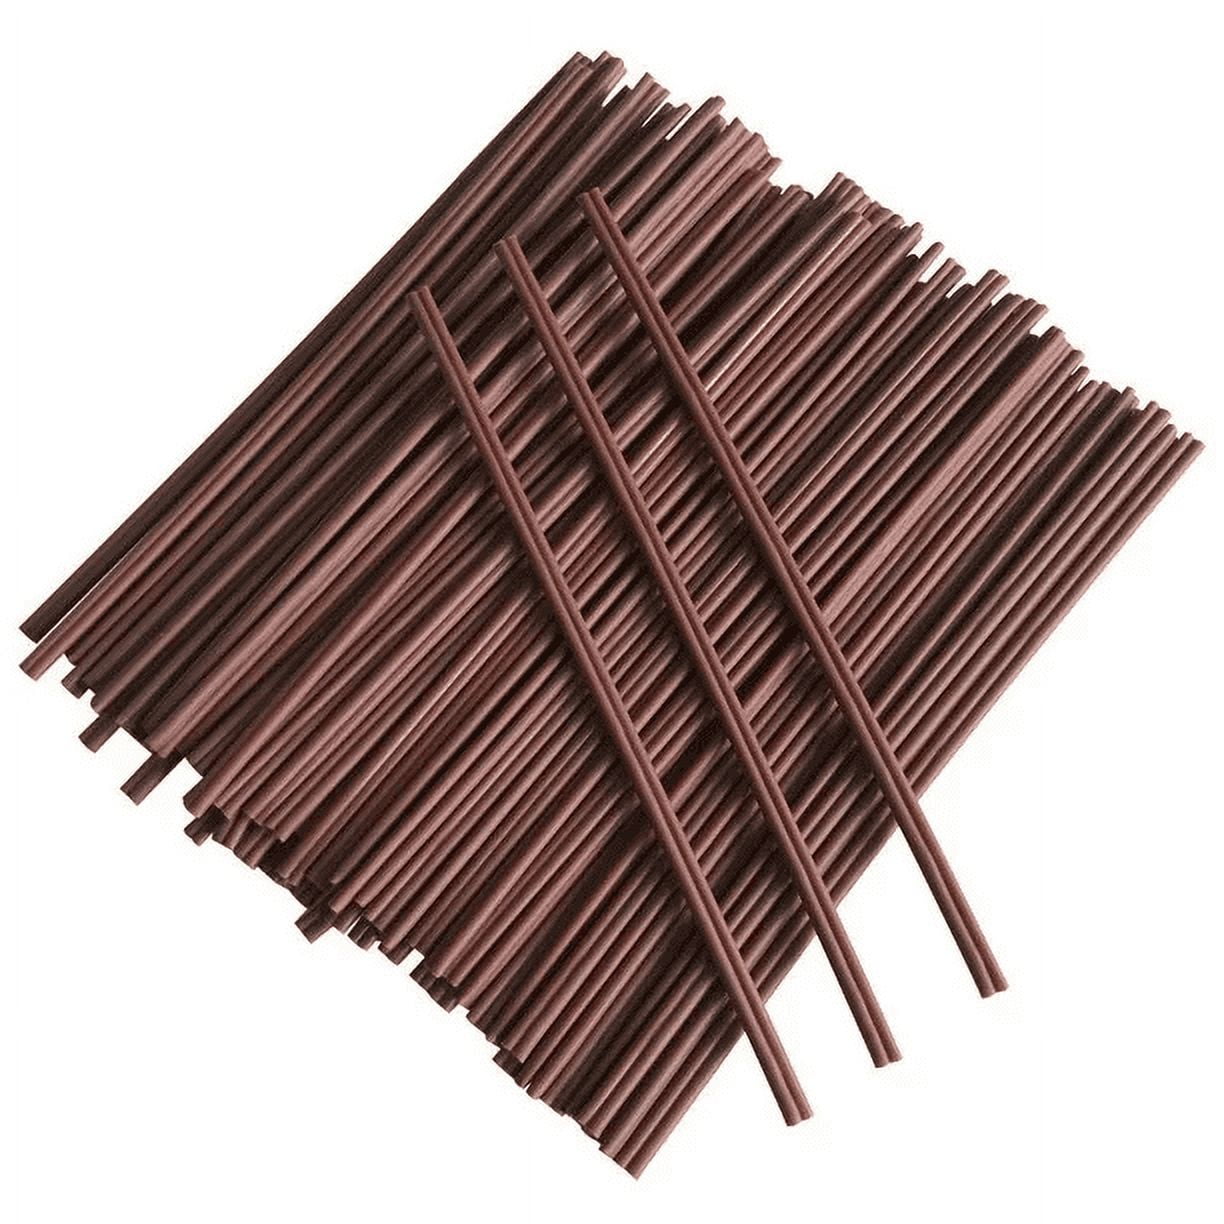 Happon 100pcs/set Disposable Two-place Sucker Straws Stirrer Coffee  Drinking Straws, Plastic Coffee Stiring Stick for Cafe, Restaurant, Home  Use 7